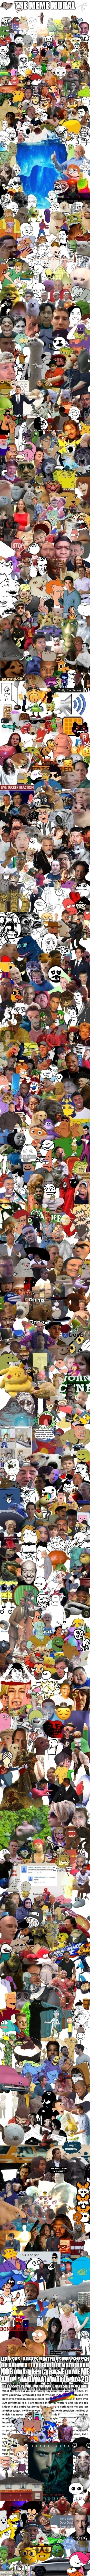 All Meme Characters in one Frame